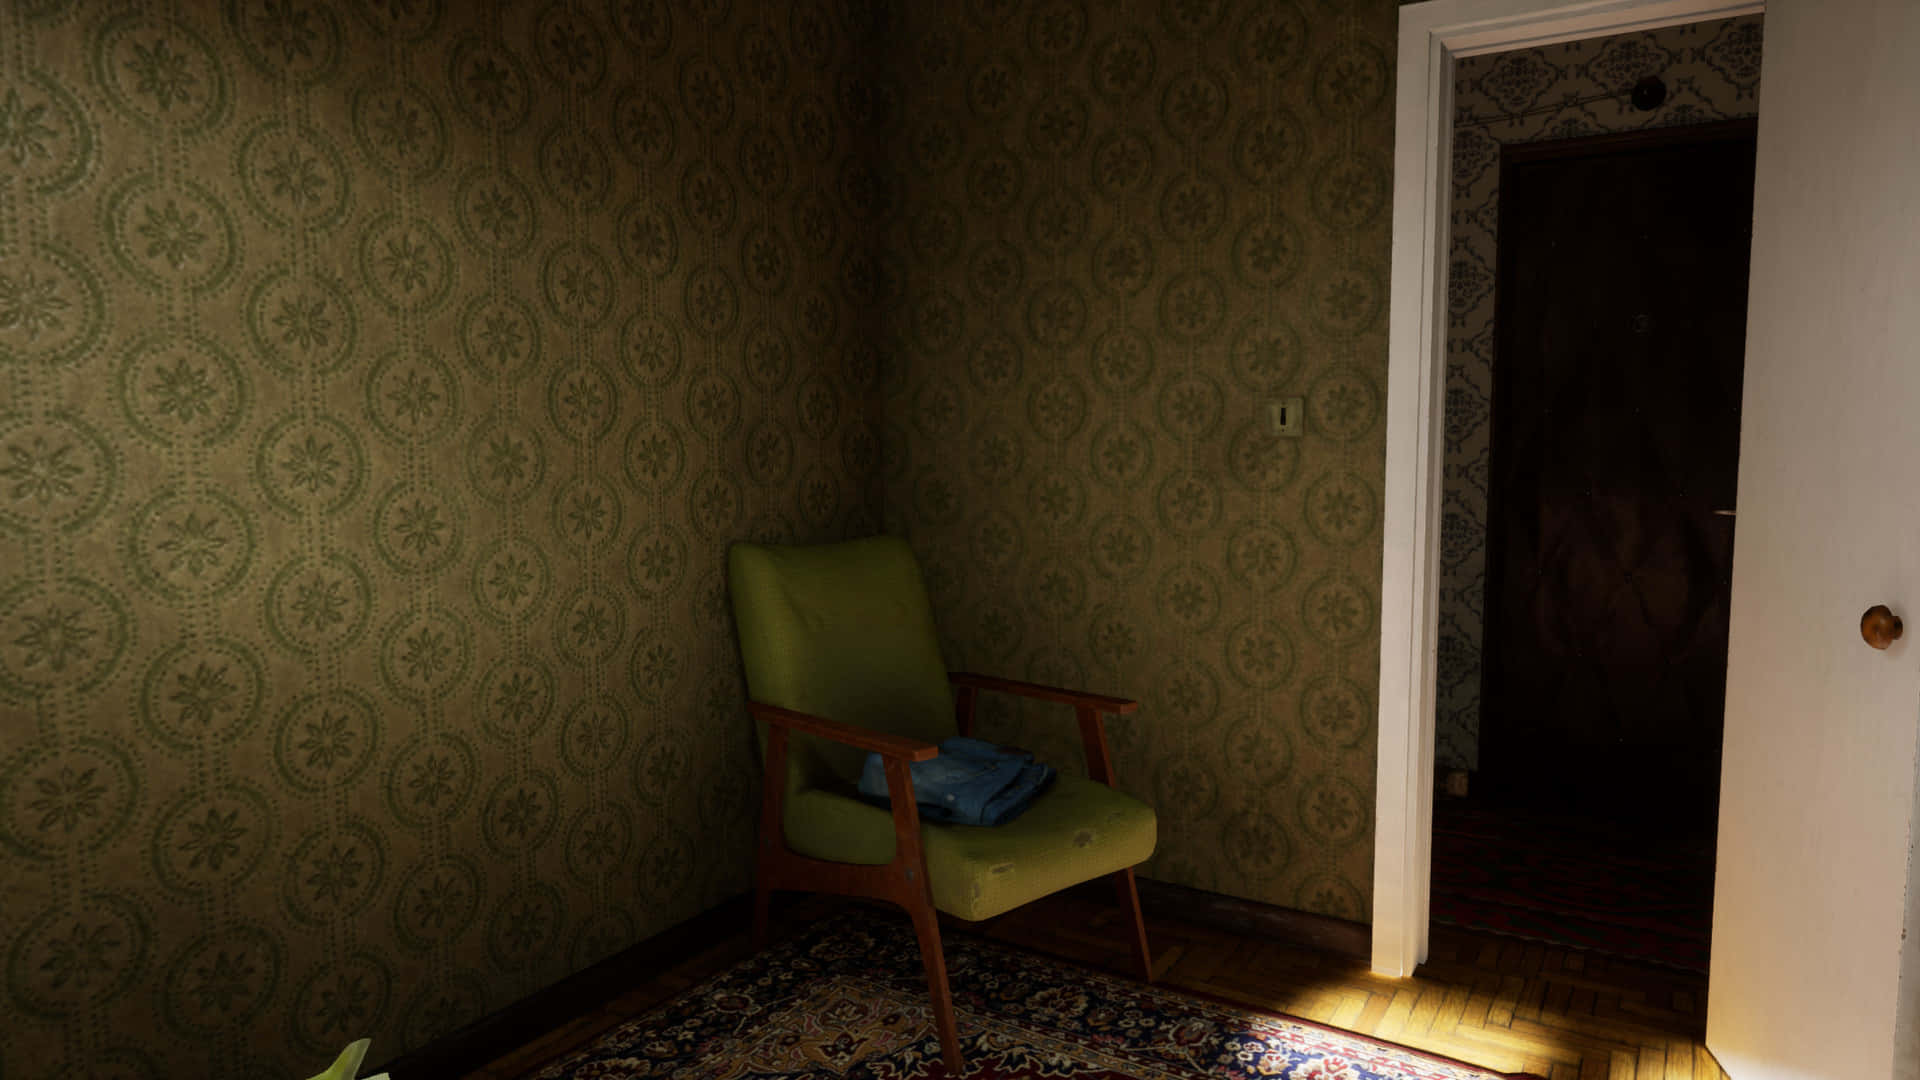 A Room With A Green Chair And A Green Rug Wallpaper